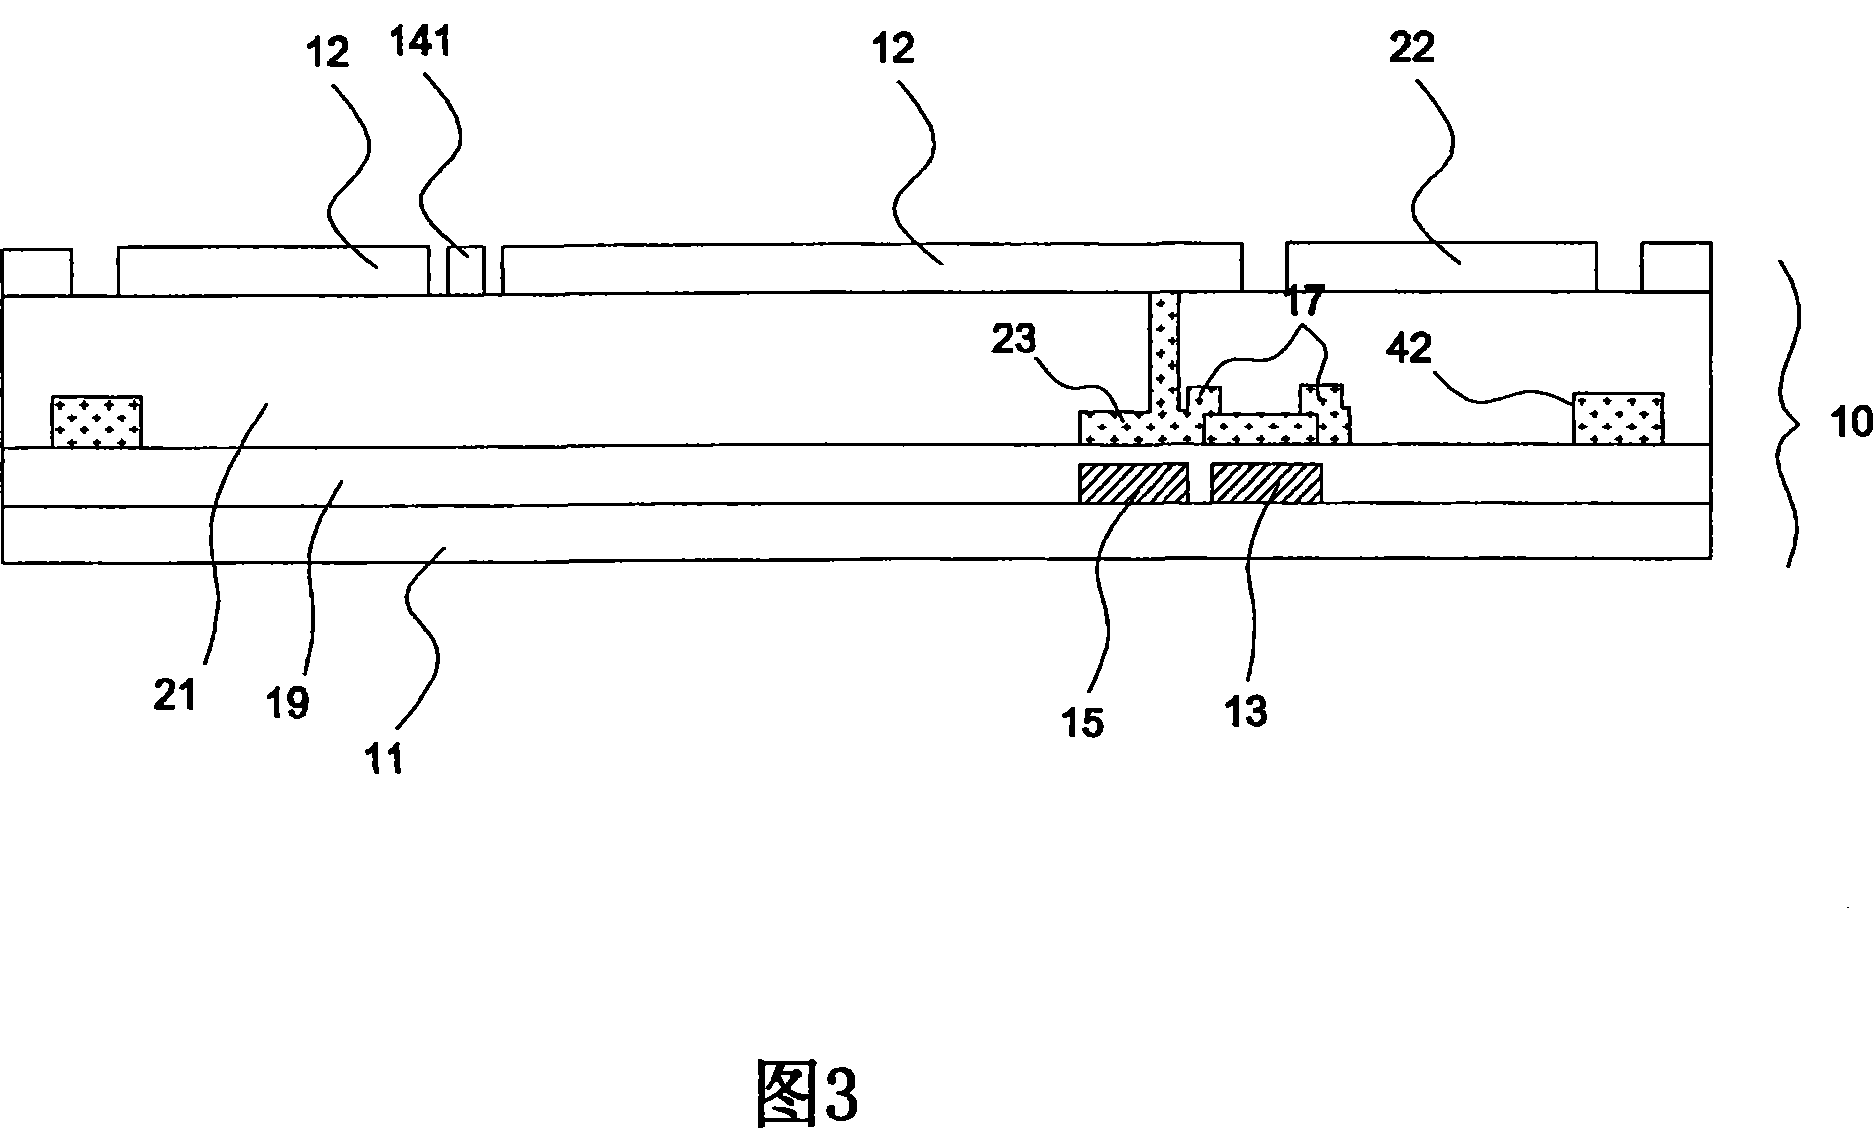 Thin-film transistor array substrate